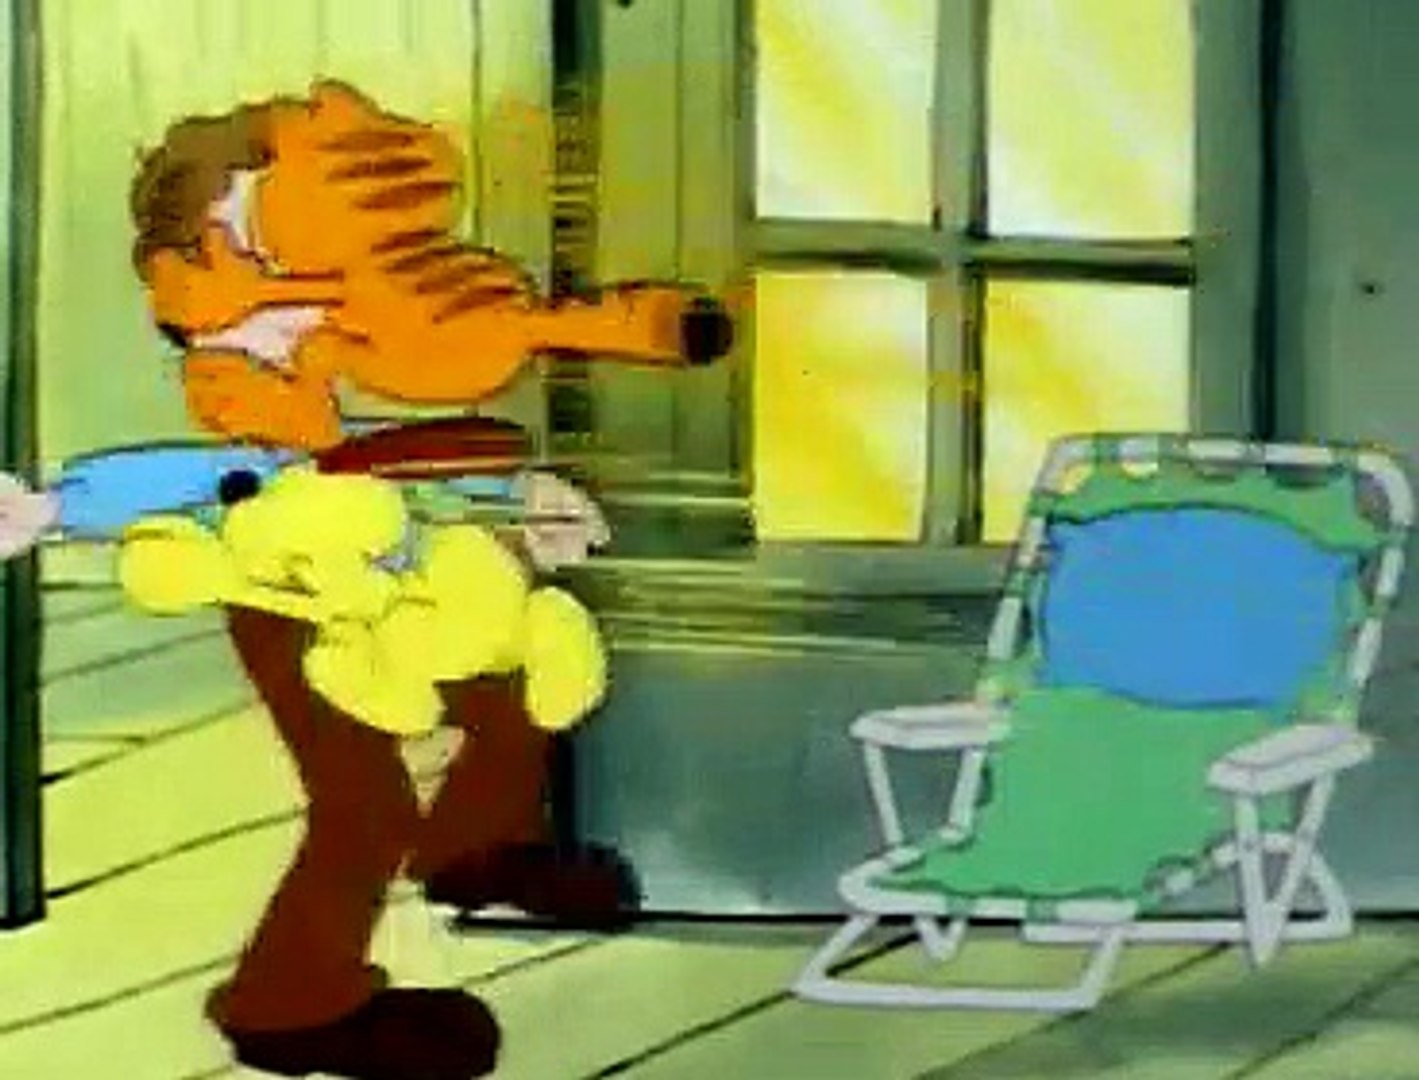 Garfield S02E23 Mystic Manor, Flop Goes the Weasel, The Legend of Long Jon